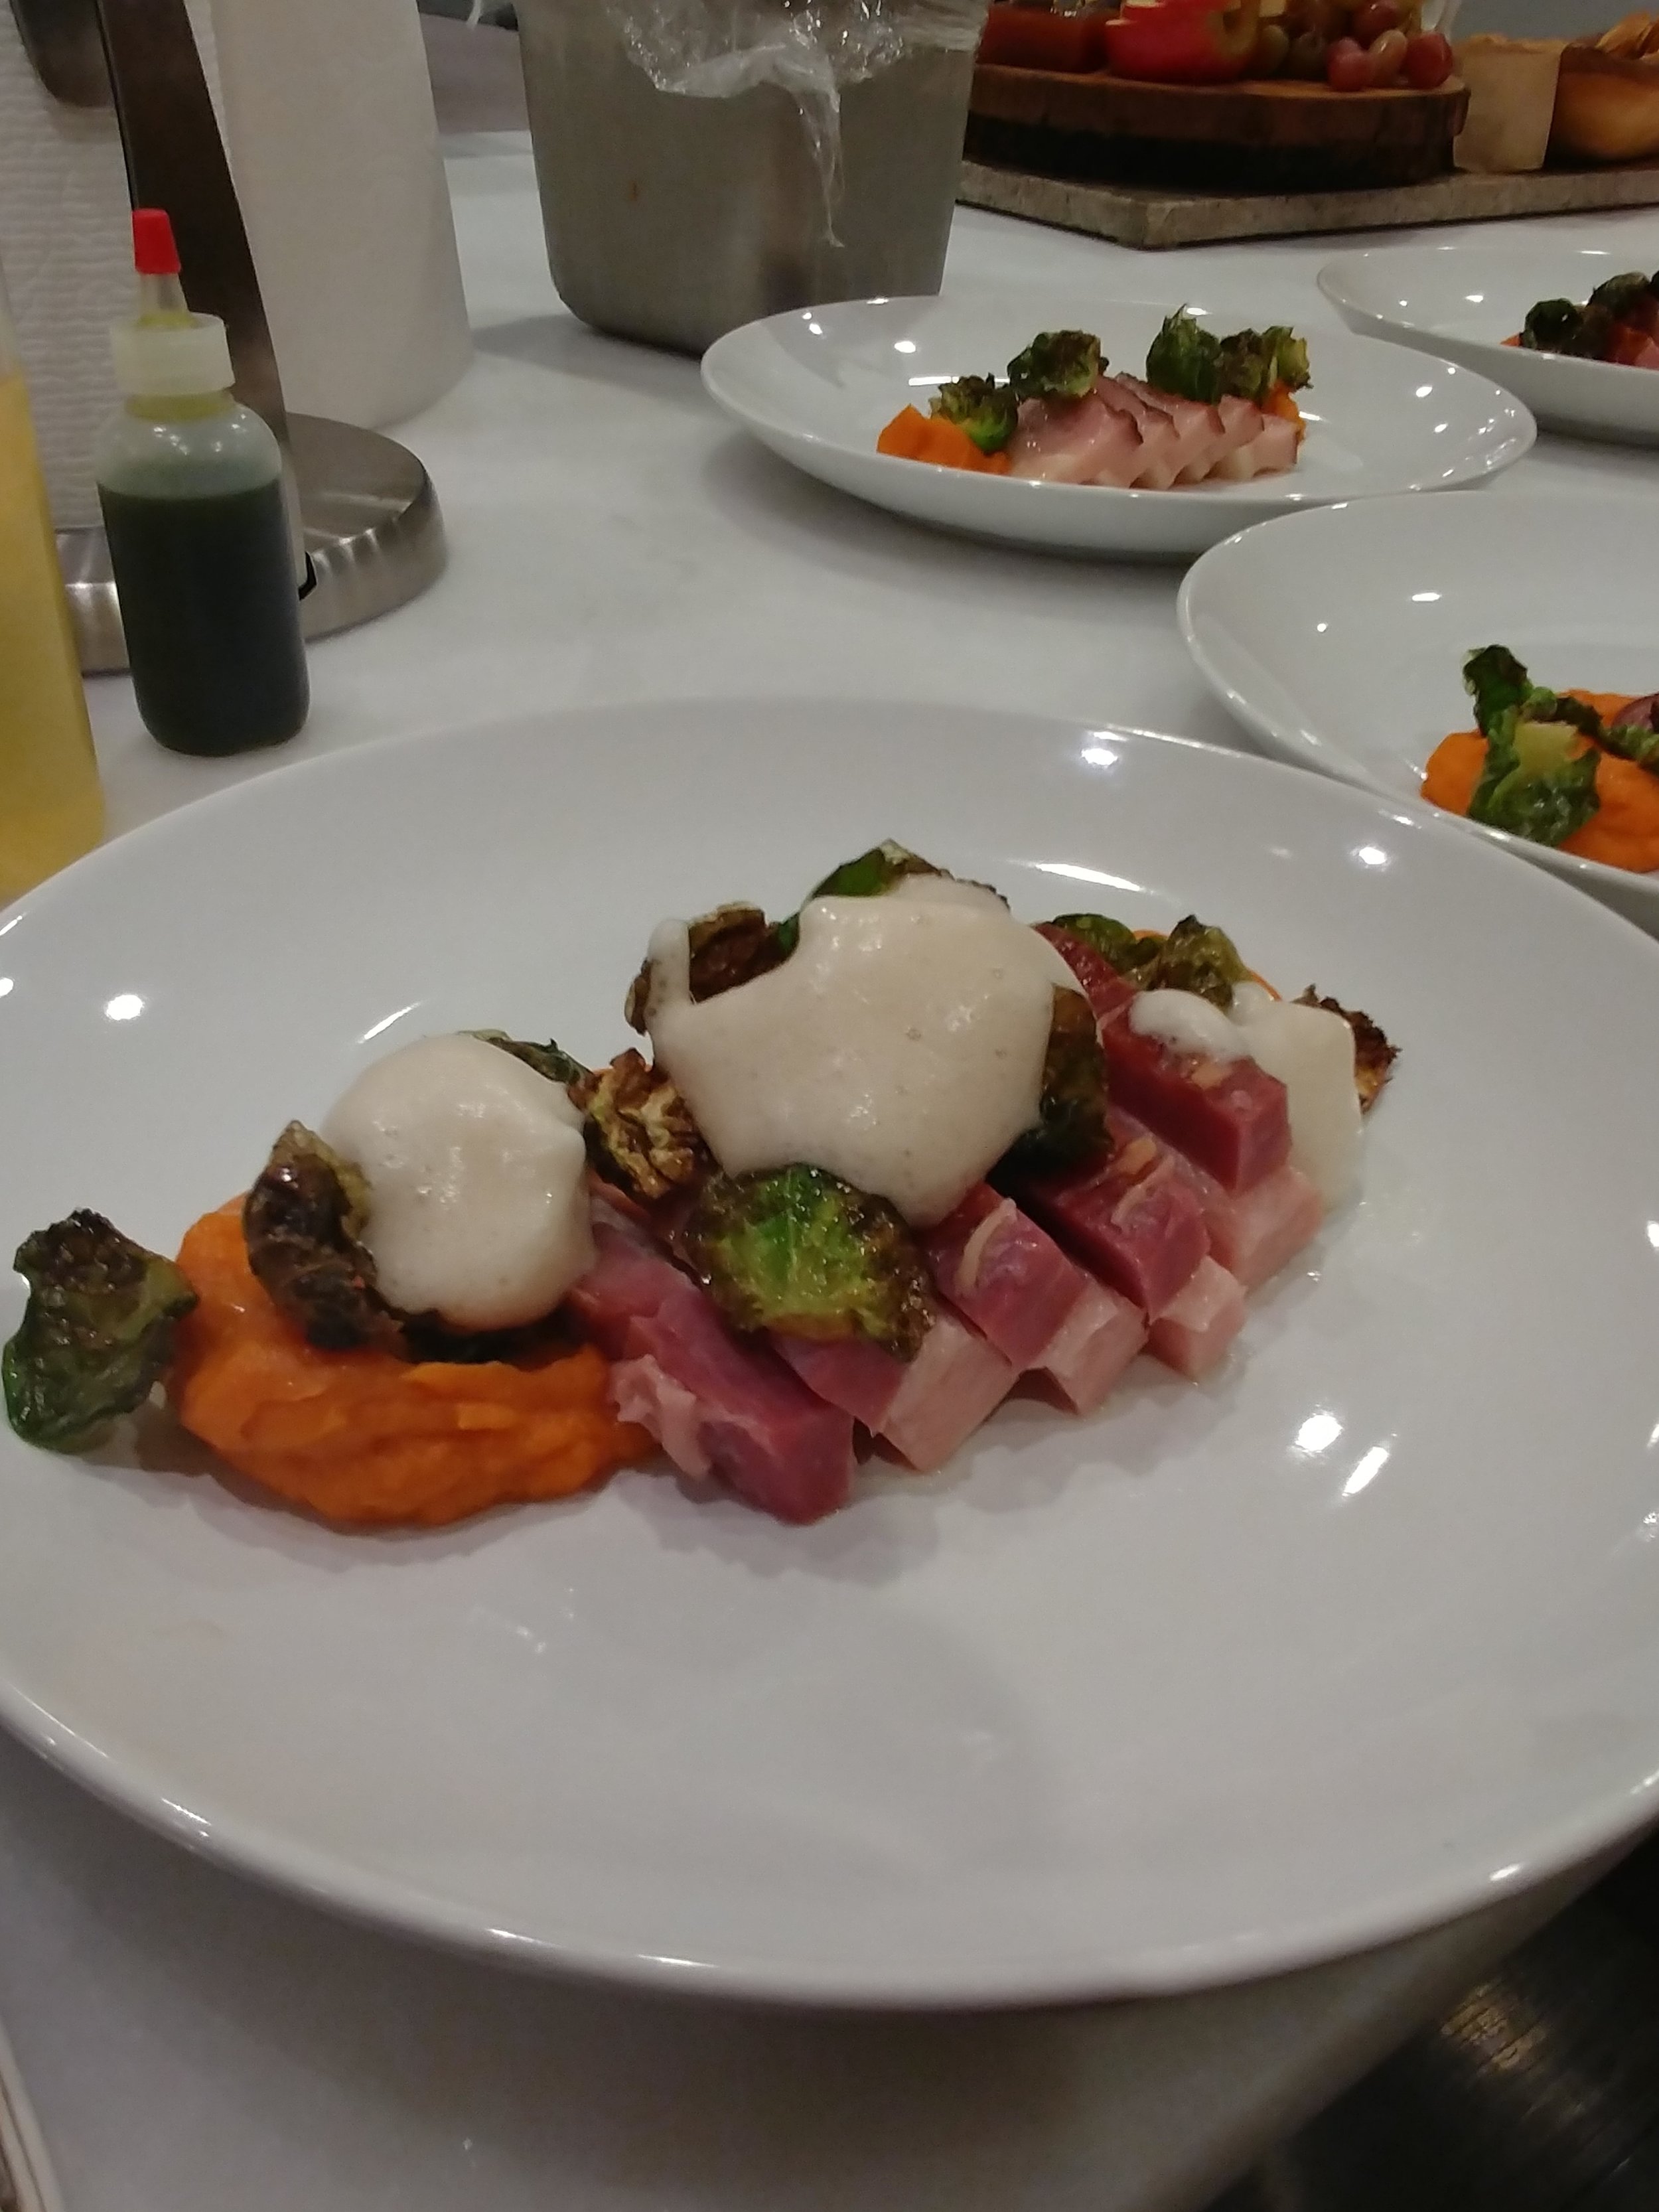  24hr. SOUS VIDE BACON Yam puree, Crispy Brussels Sprout Leaves, Spiced Cider - Rose Water Foam